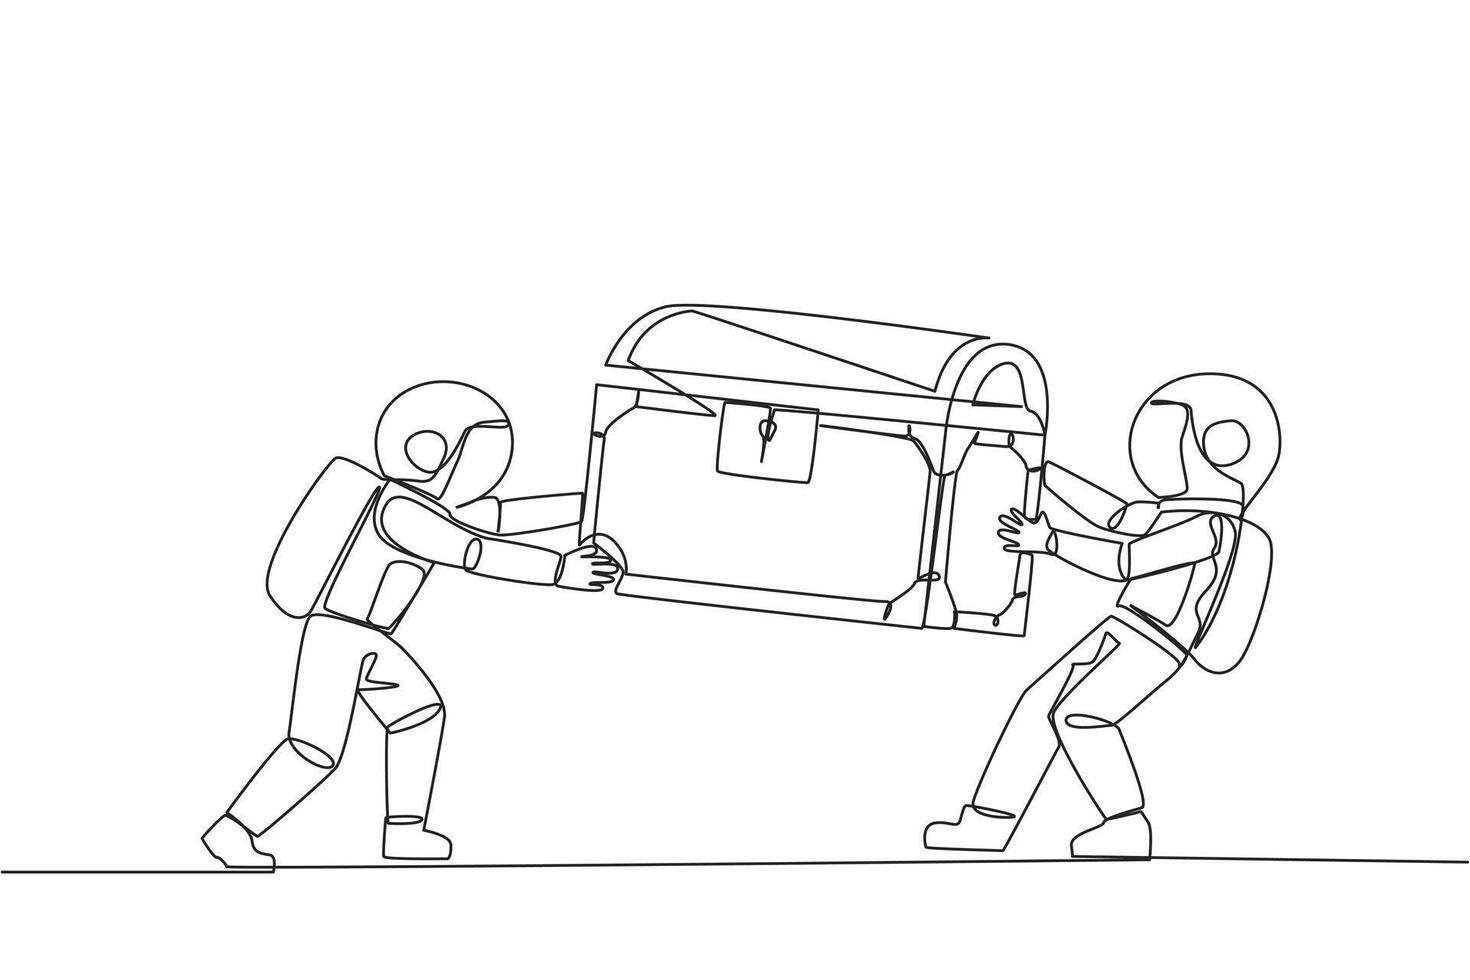 Continuous one line drawing two angry astronaut fighting over the treasure chest. Feel most entitled to the discovery of treasure. Rivalry and competition. Single line draw design vector illustration